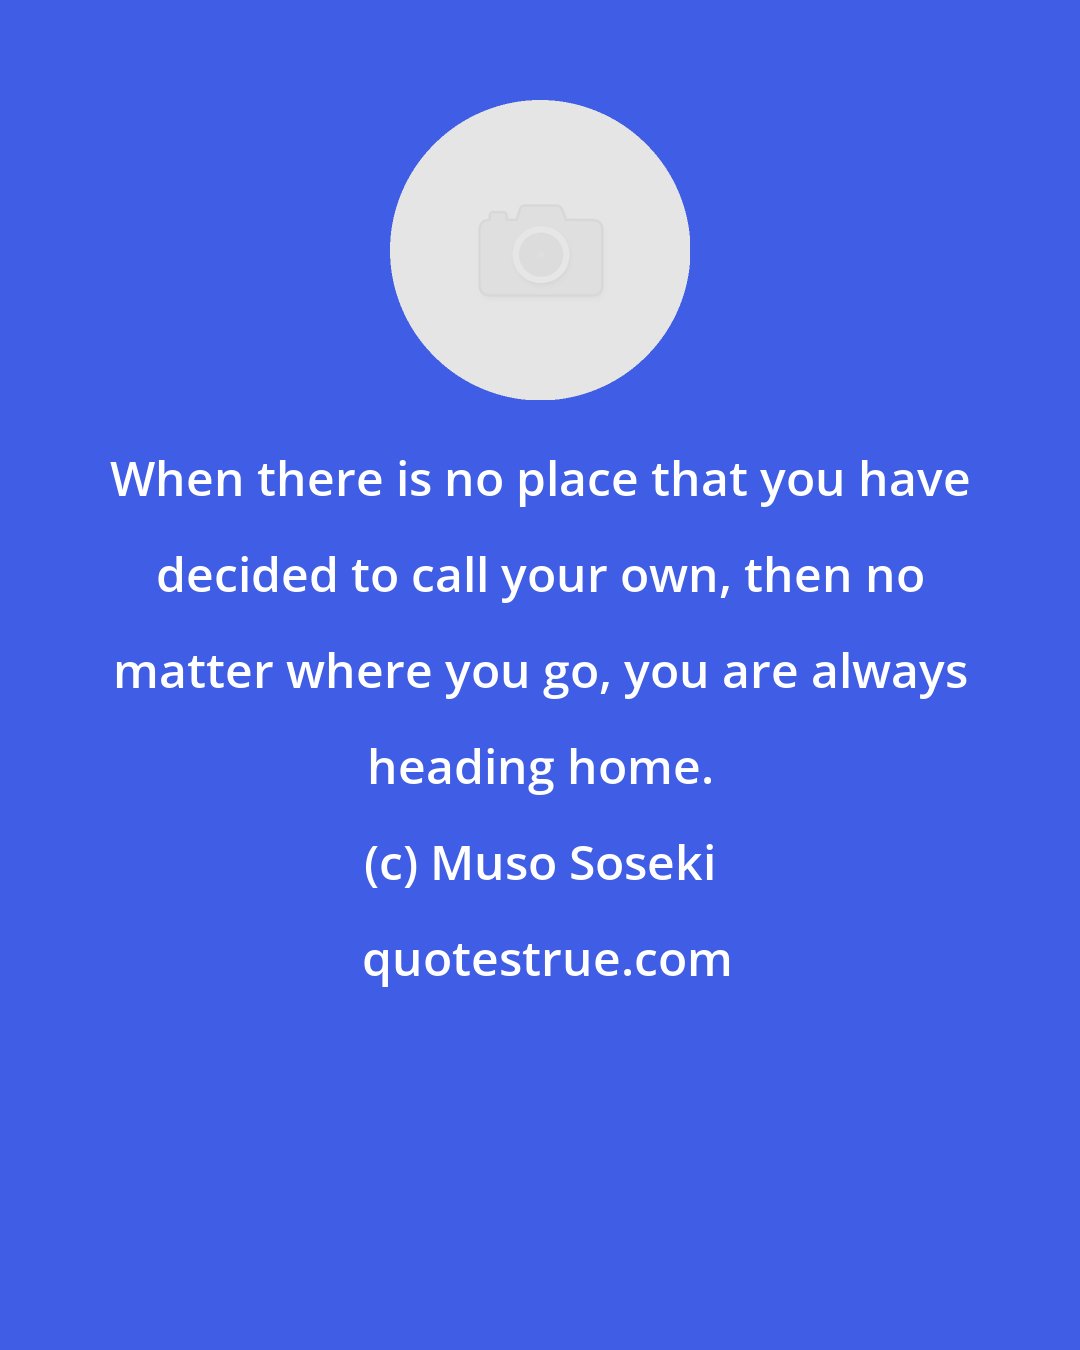 Muso Soseki: When there is no place that you have decided to call your own, then no matter where you go, you are always heading home.